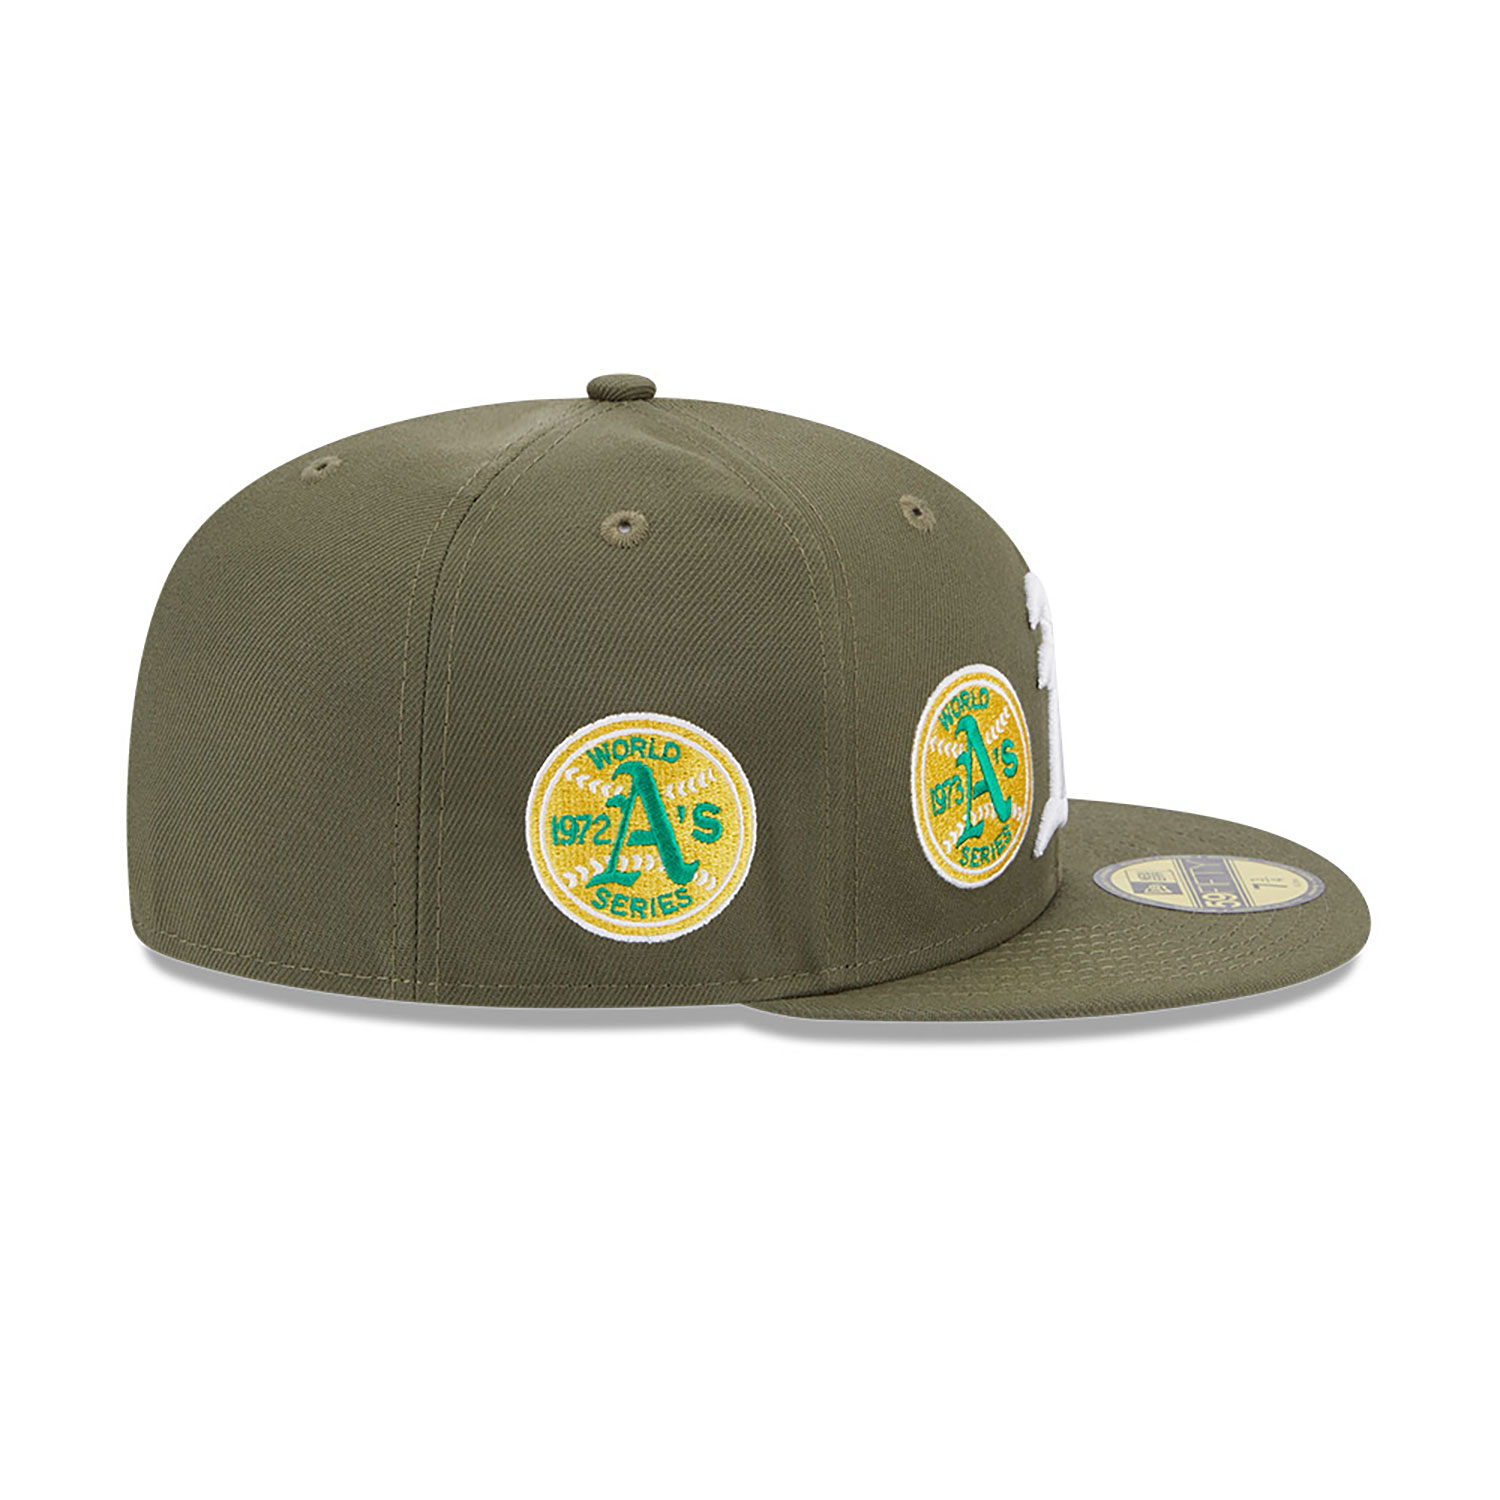 Oakland Athletics World Series Khaki 59FIFTY Fitted Cap